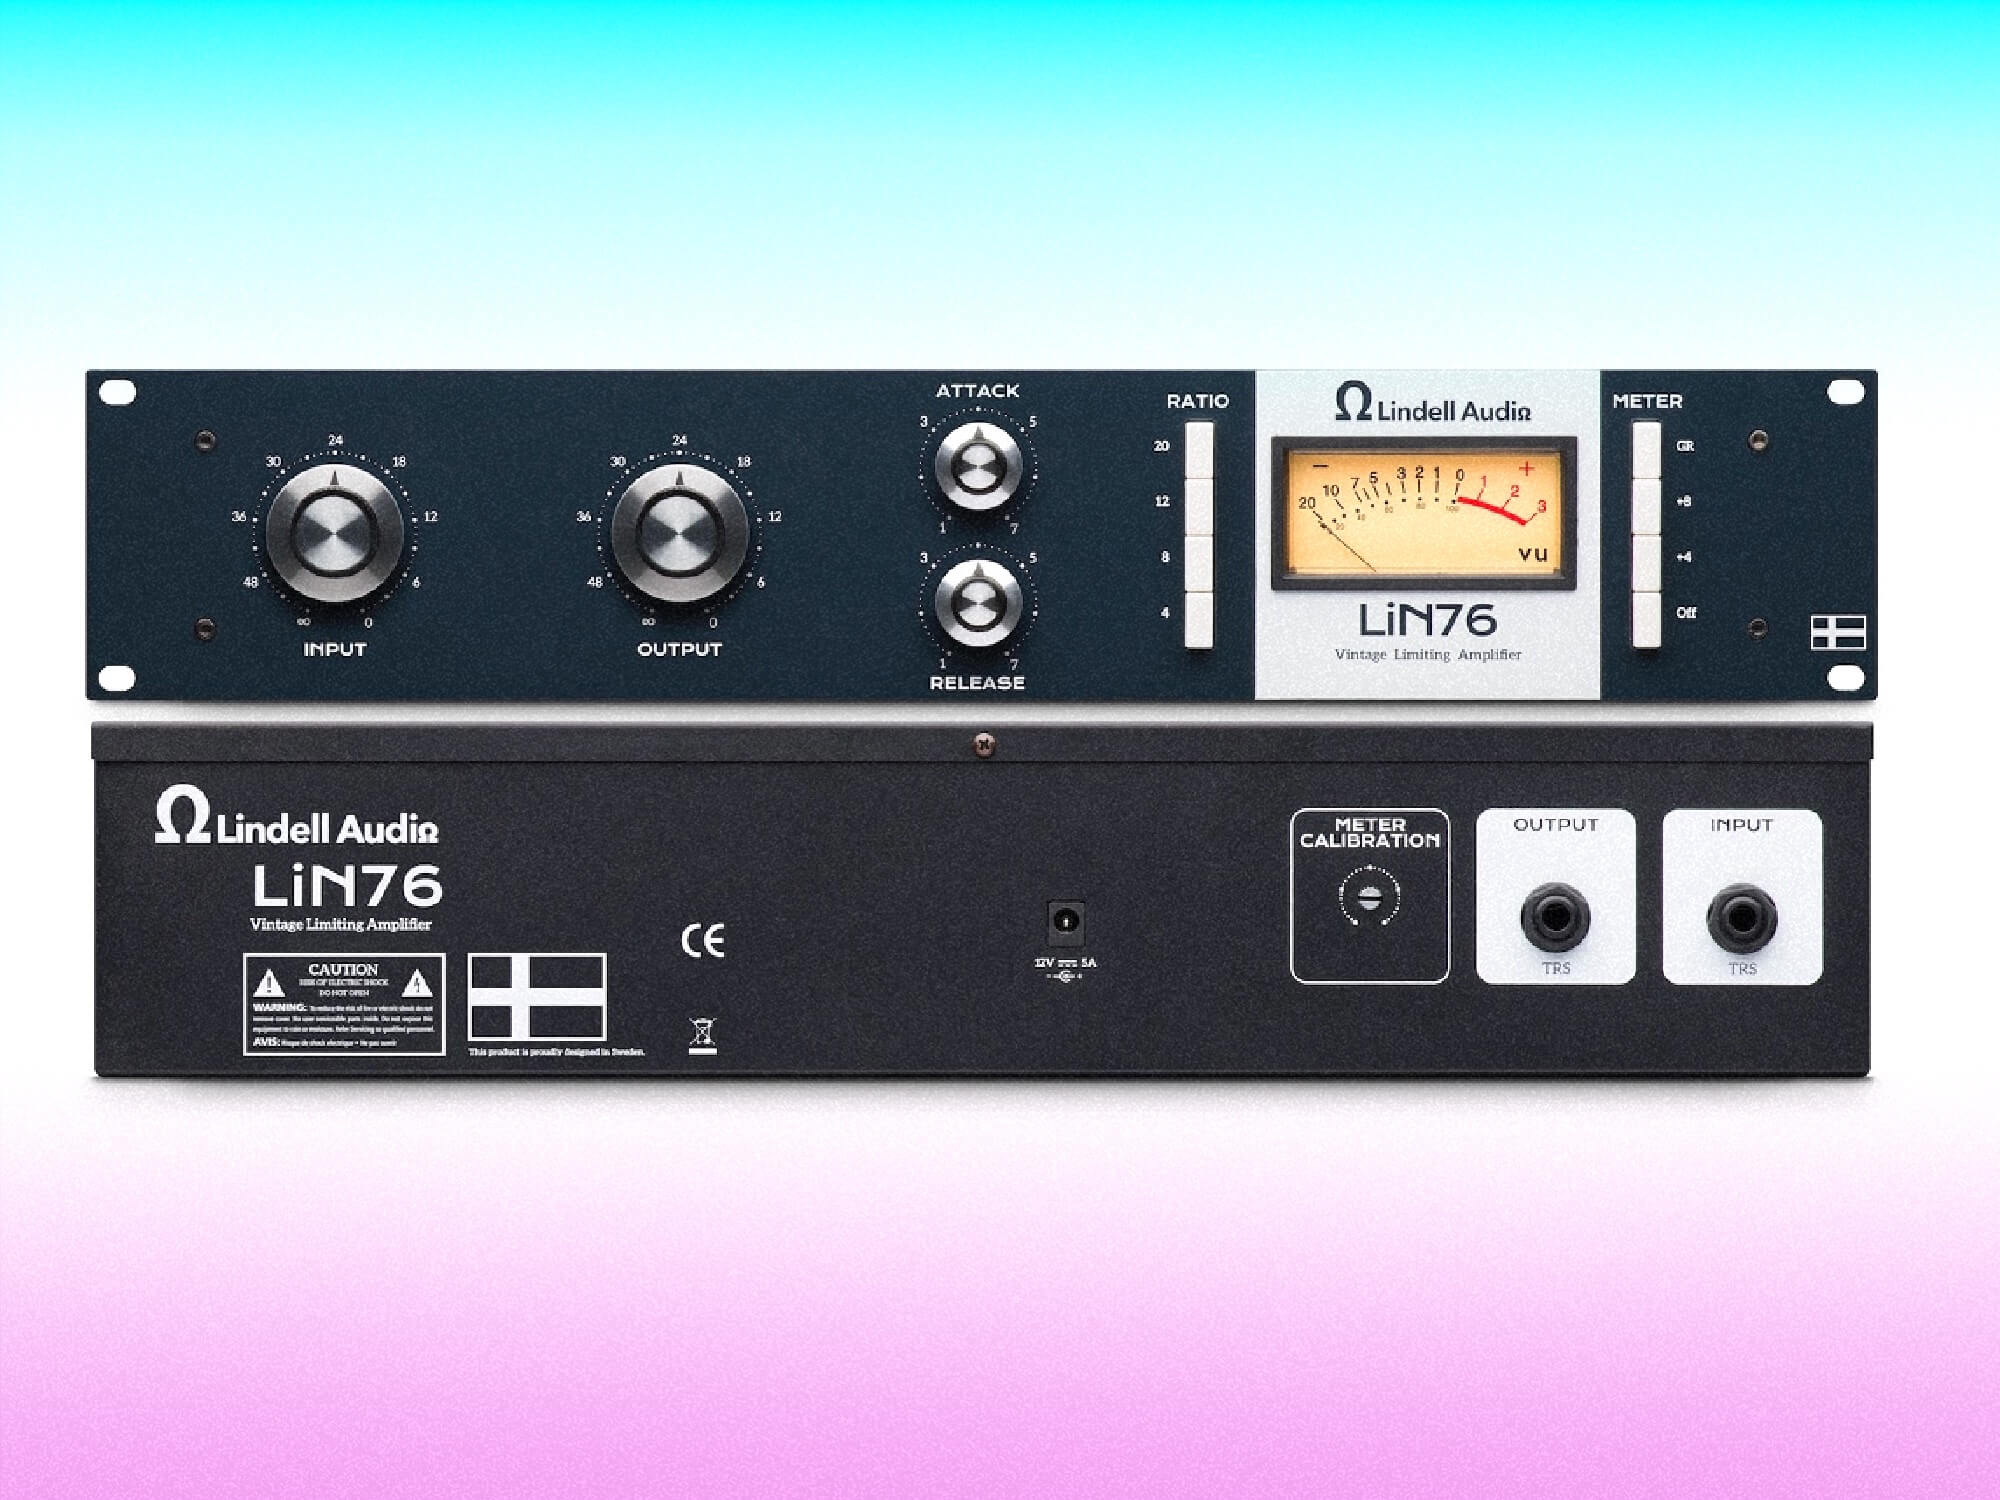 Lindell Audio's LiN76 brings '70s hardware compression into 2022 